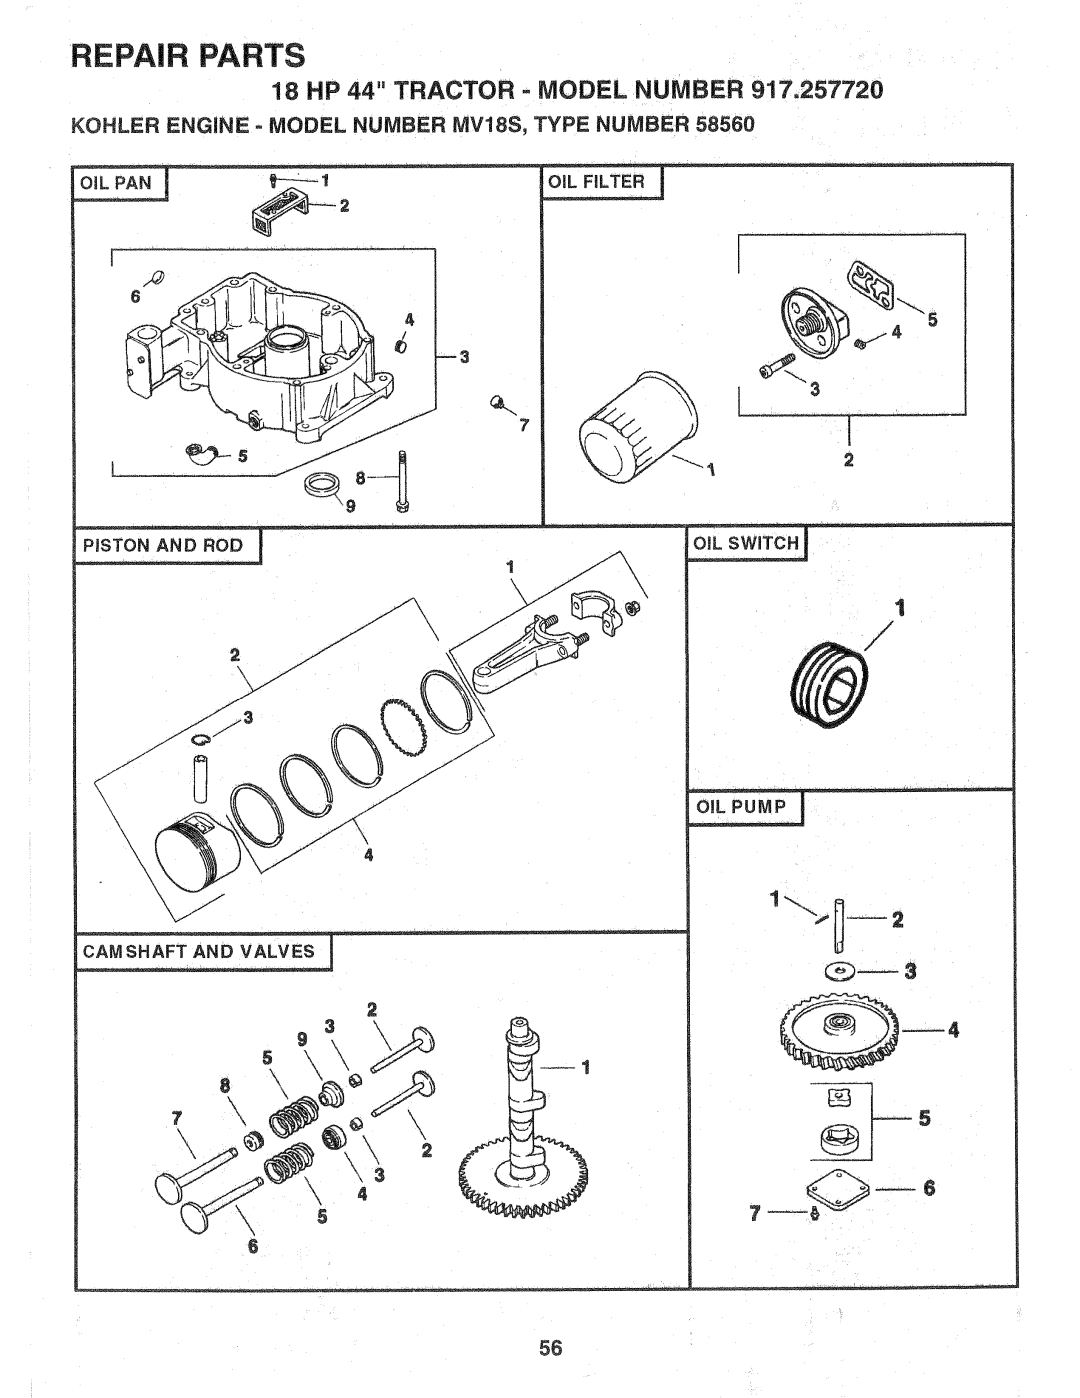 Sears 917.257720 owner manual L____T_____, Repair Parts, 18 HP 44 TRACTOR - MODEL NUMBER, 7_-6, Camshaft And Valves 